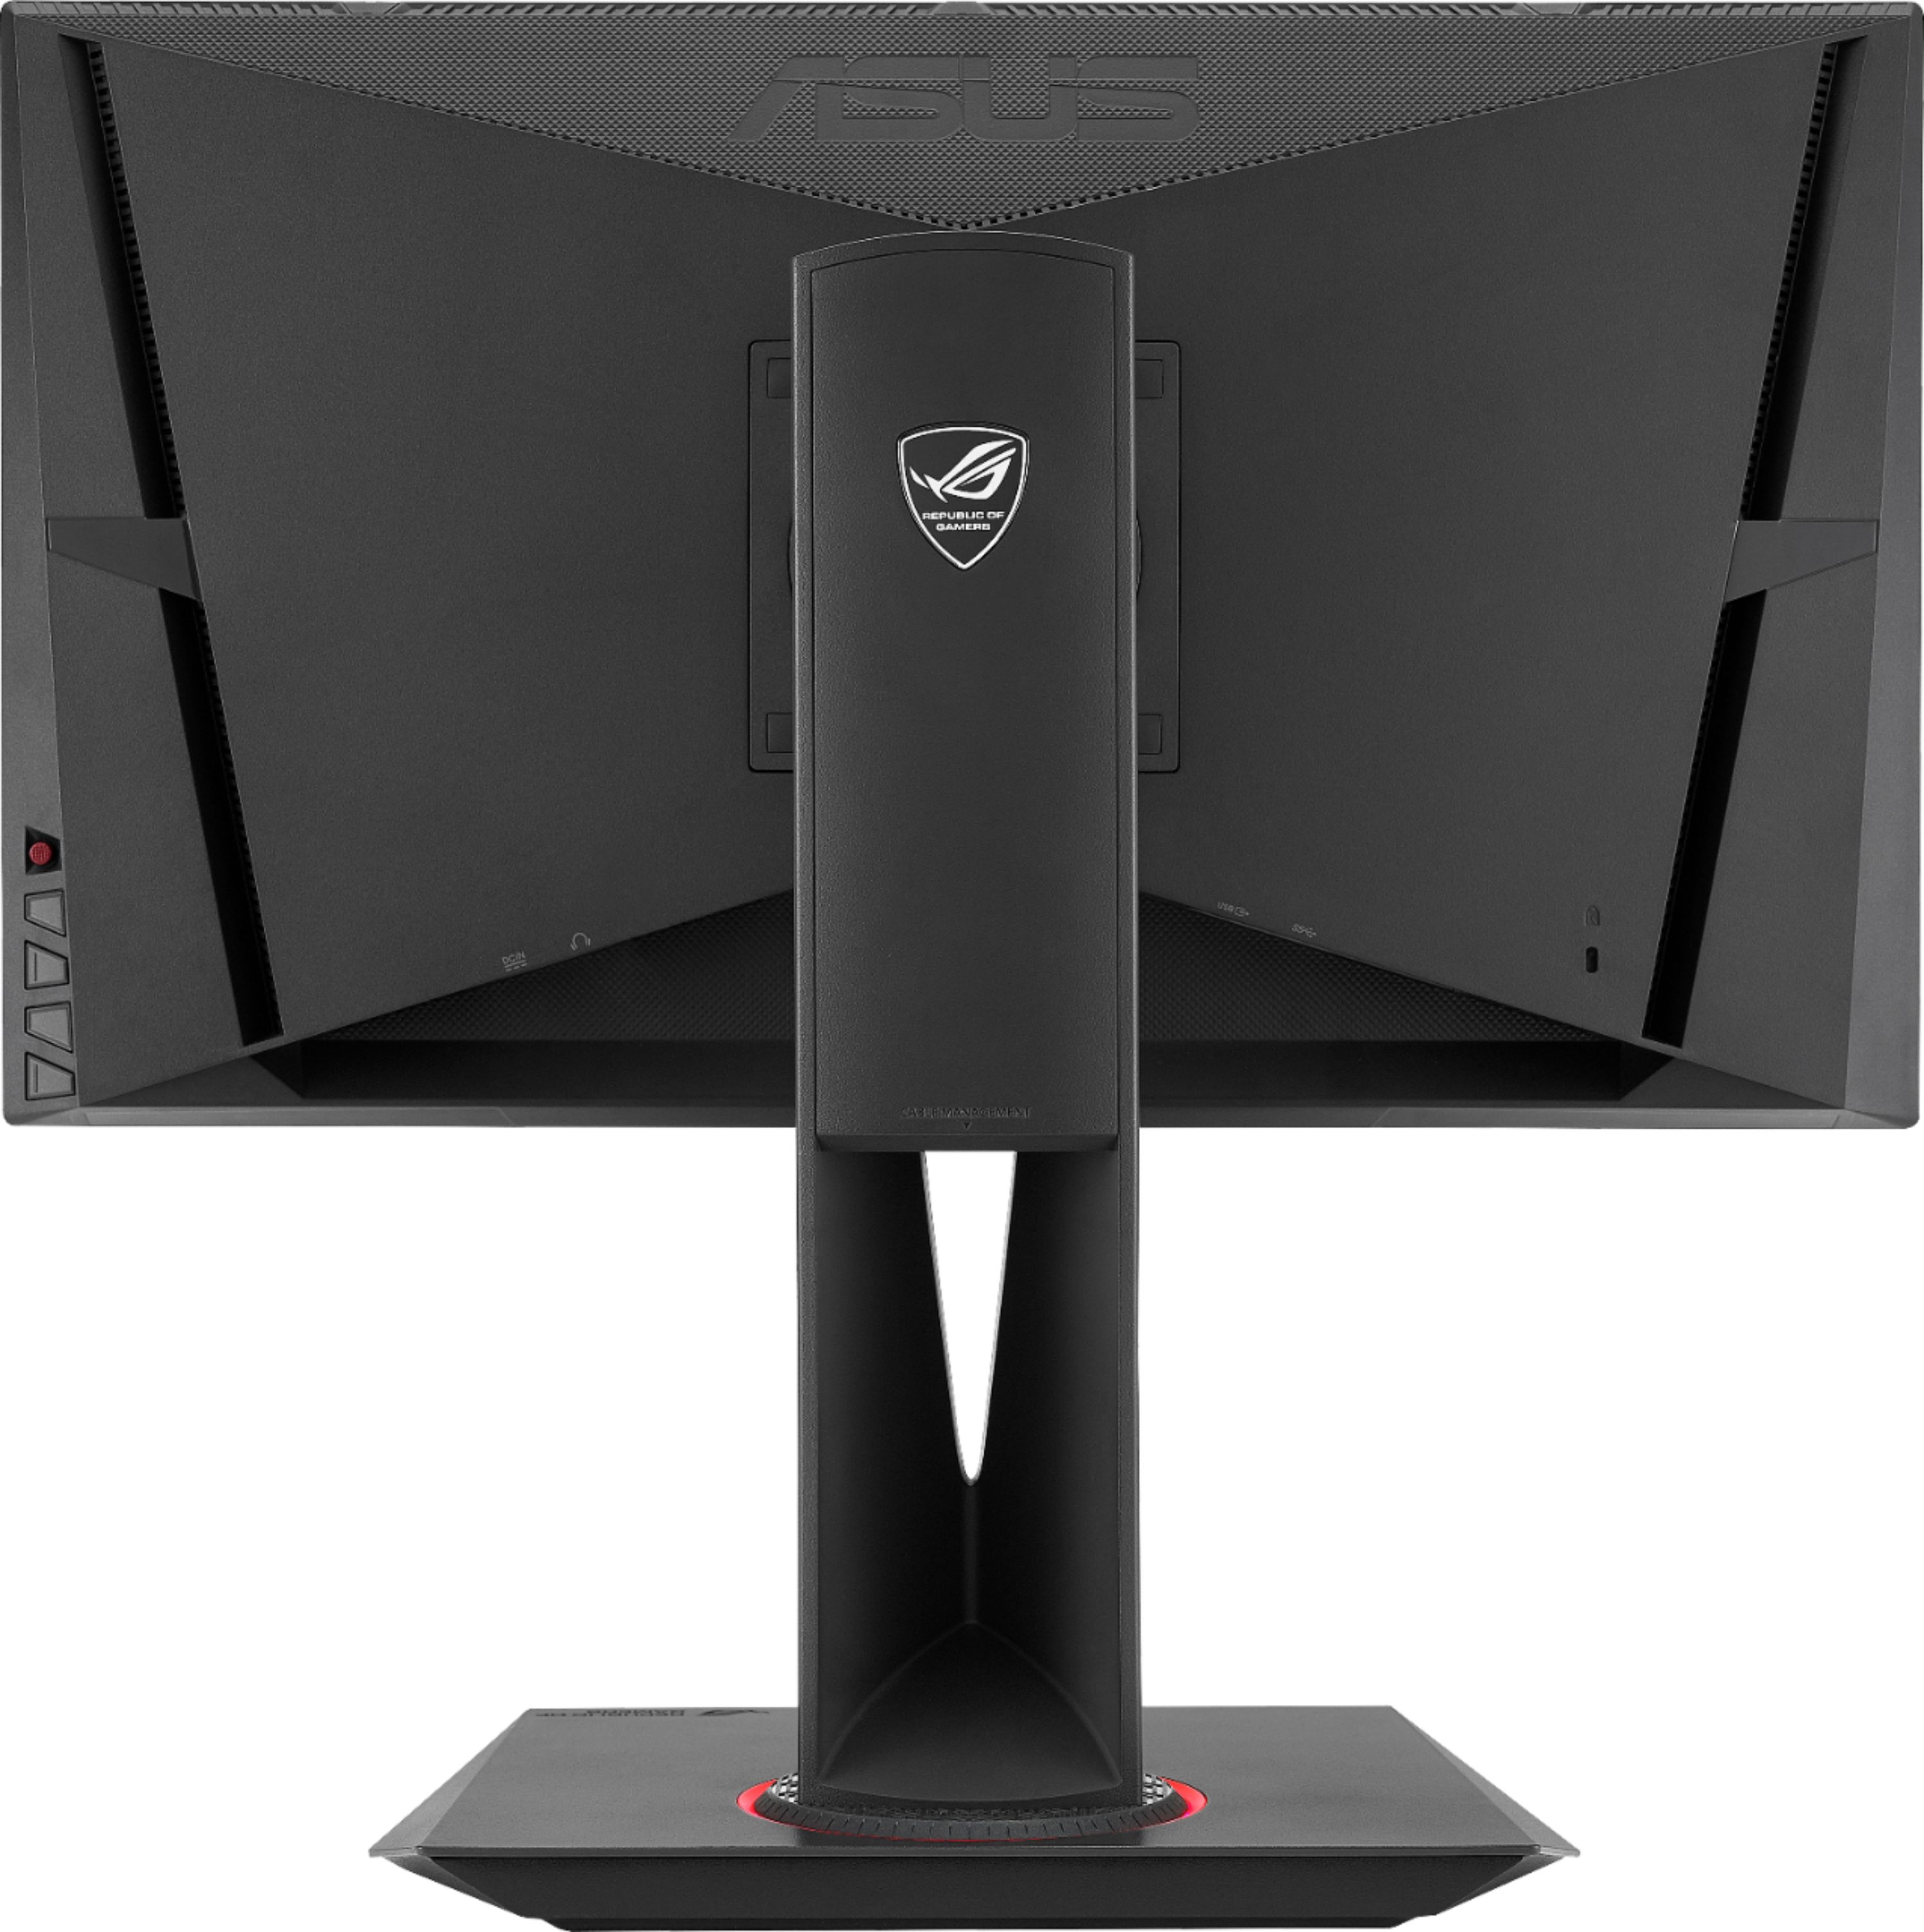 Back View: ASUS - Geek Squad Certified Refurbished ROG Swift 24" LCD FHD G-SYNC Monitor - Black